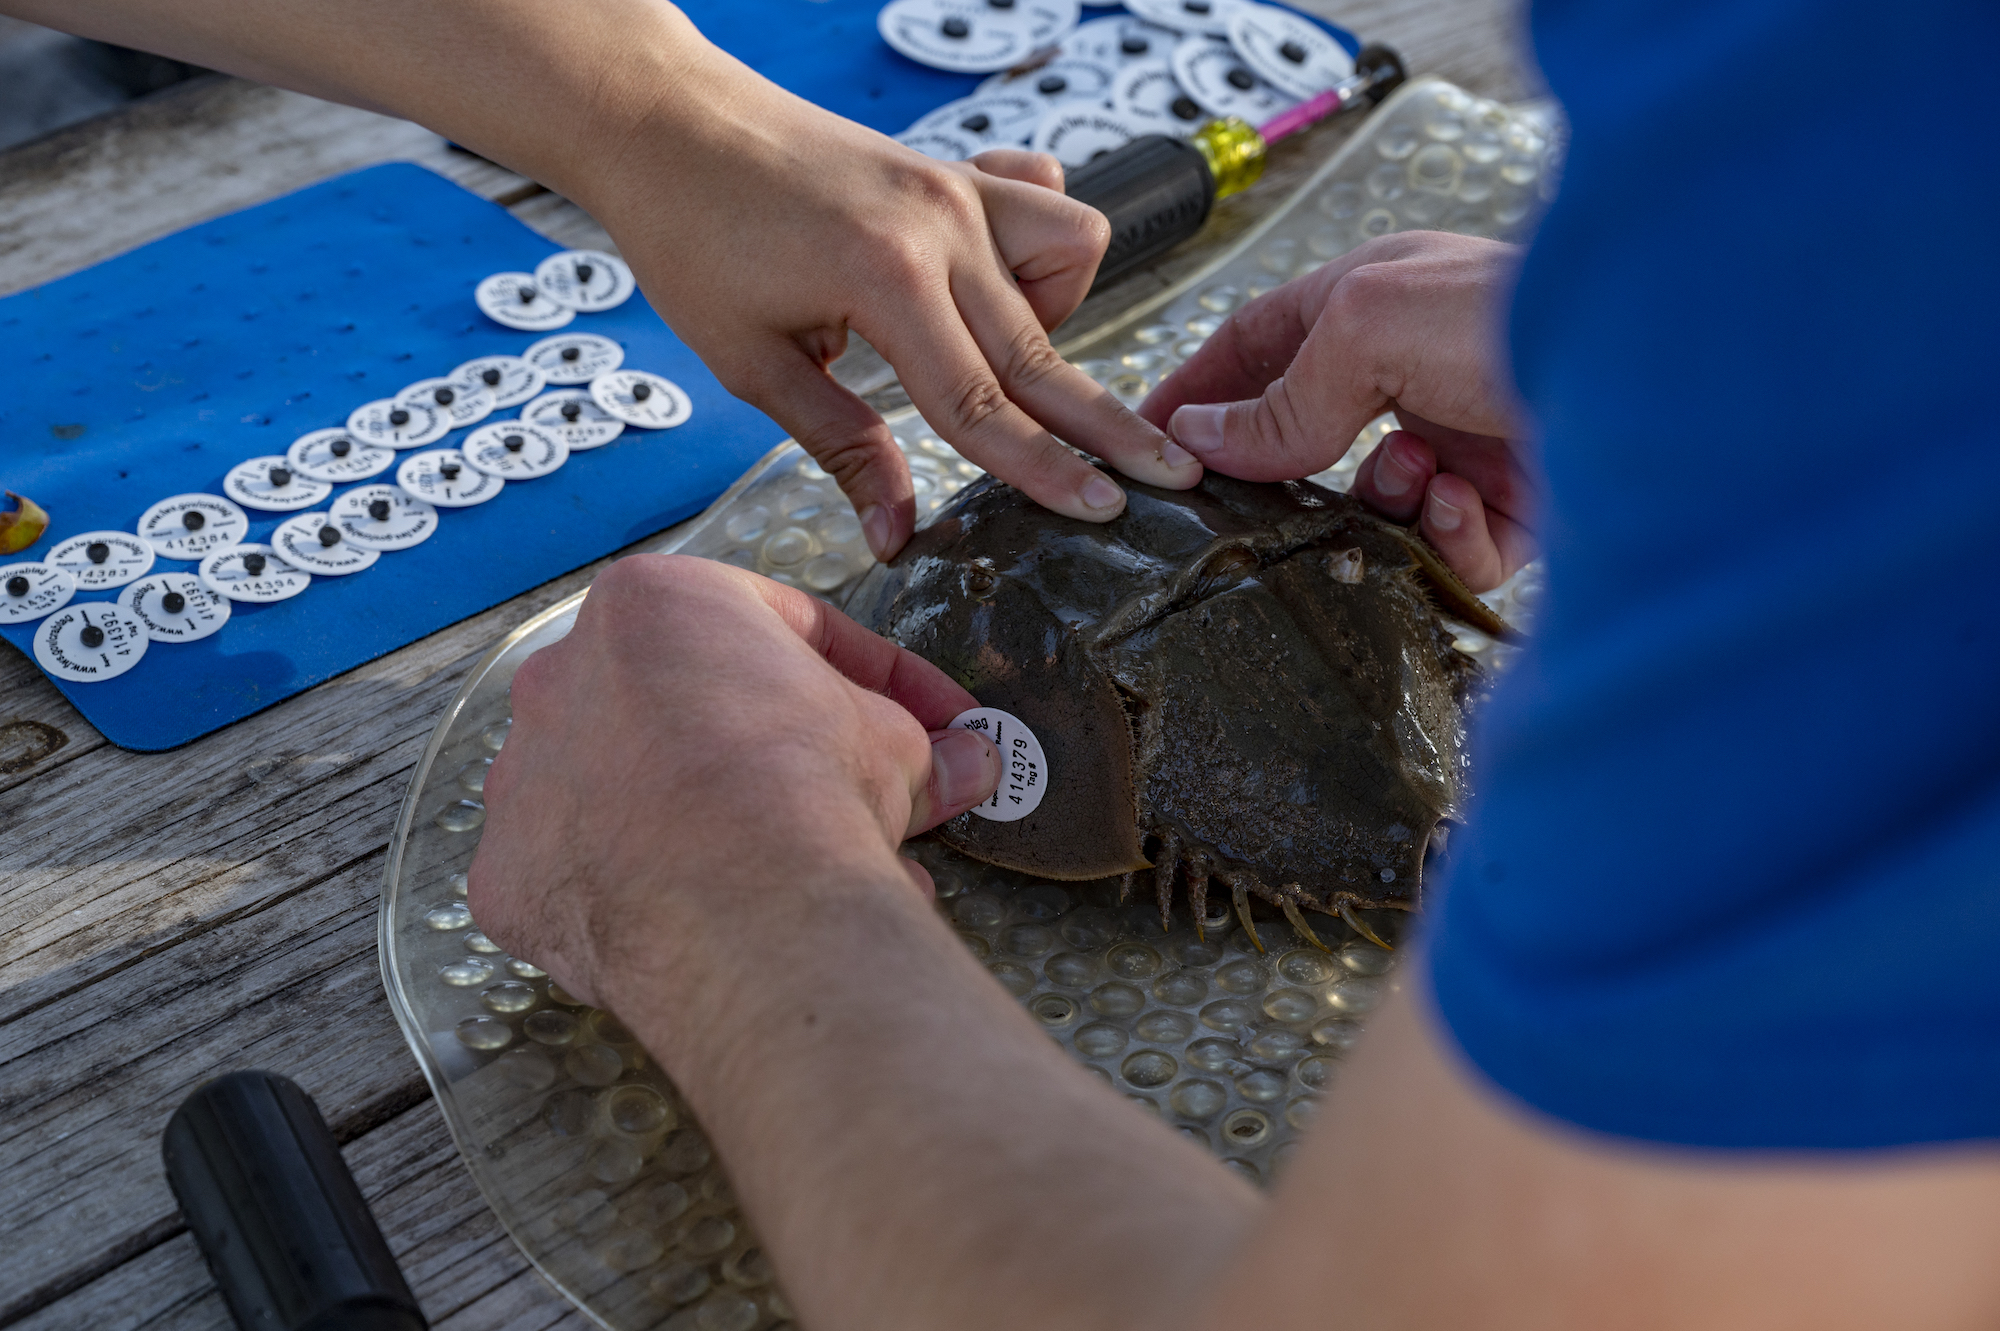 This is a photo that shows two people holding a horseshoe crab while tagging it for a scientific research project.